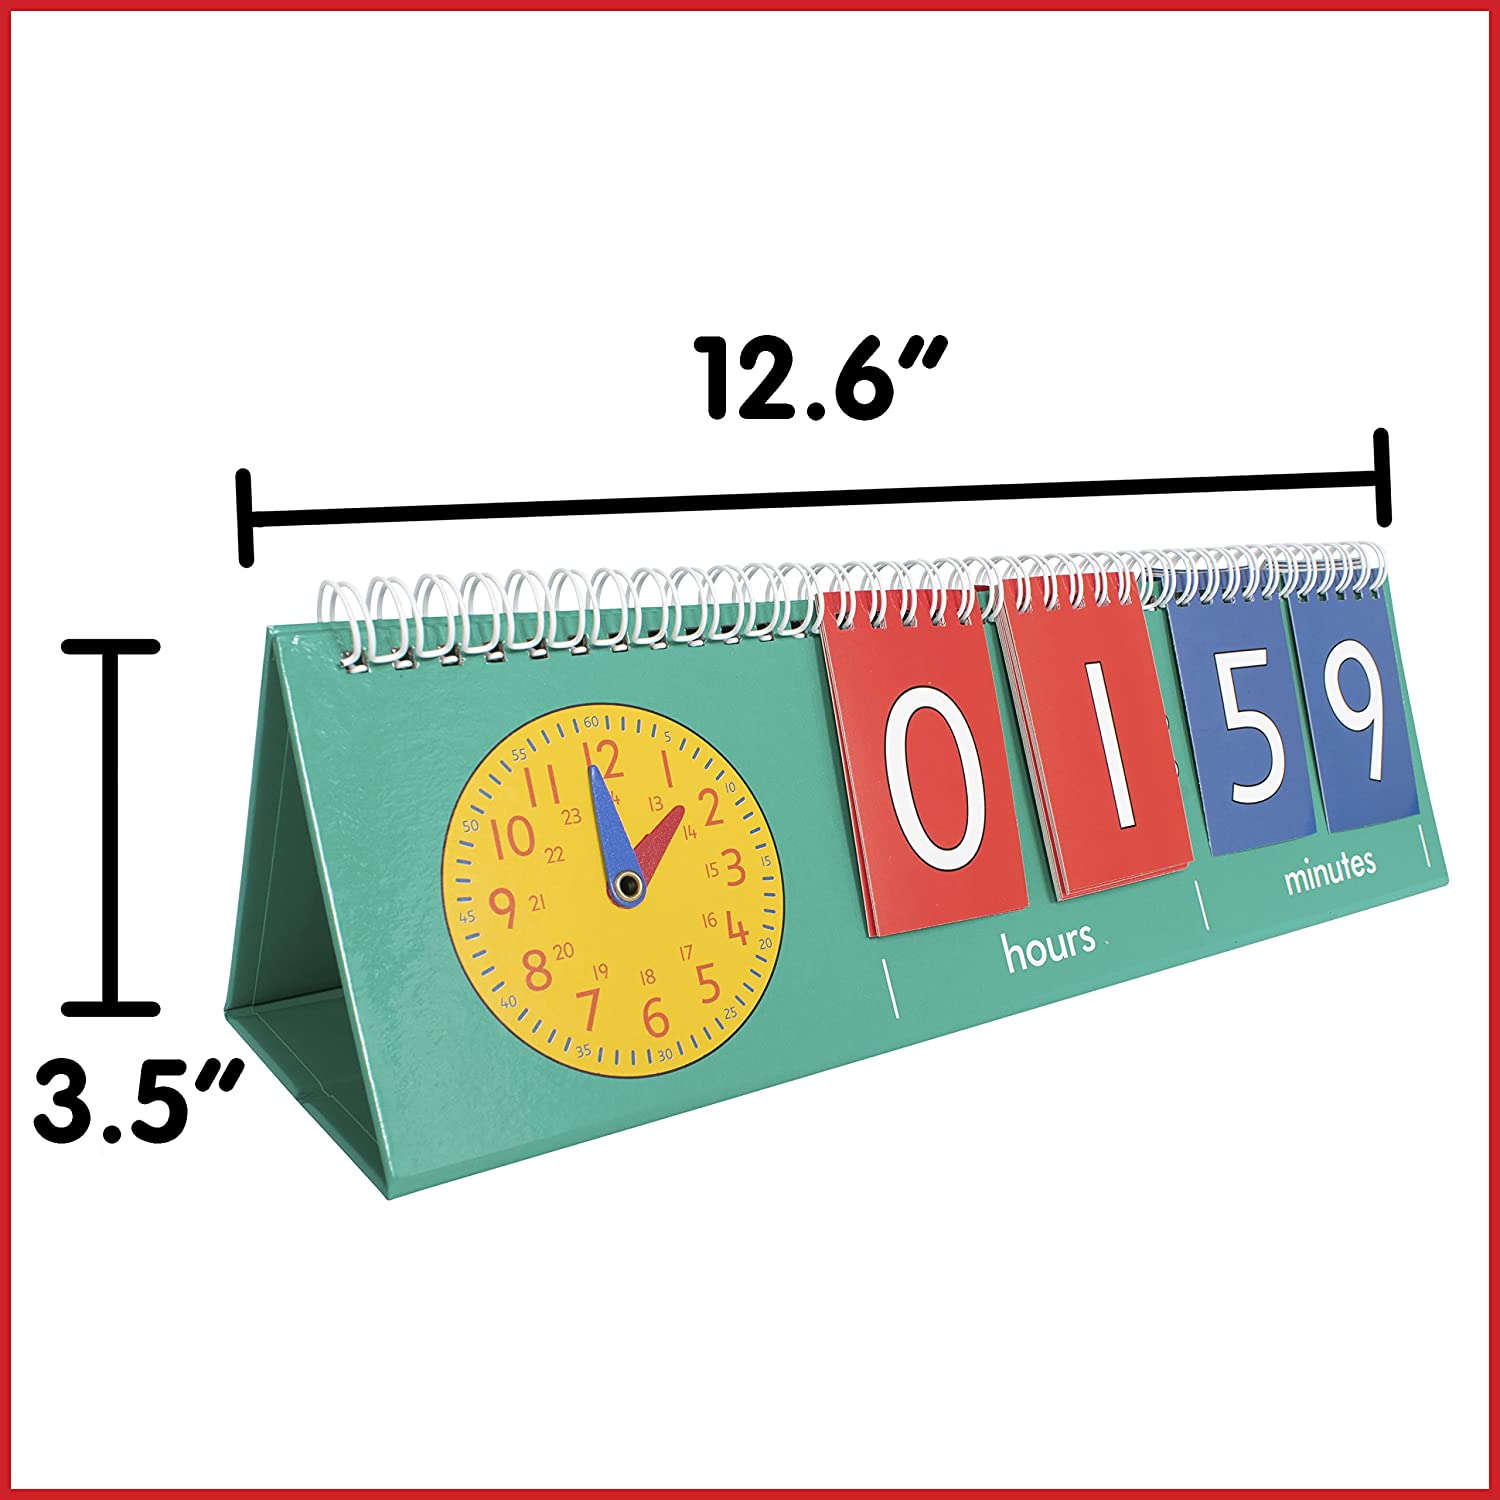 edxeducation Time Flip Chart - Teaching Clock for Kids - Learn to Tell Time with Analog and Digital Formats